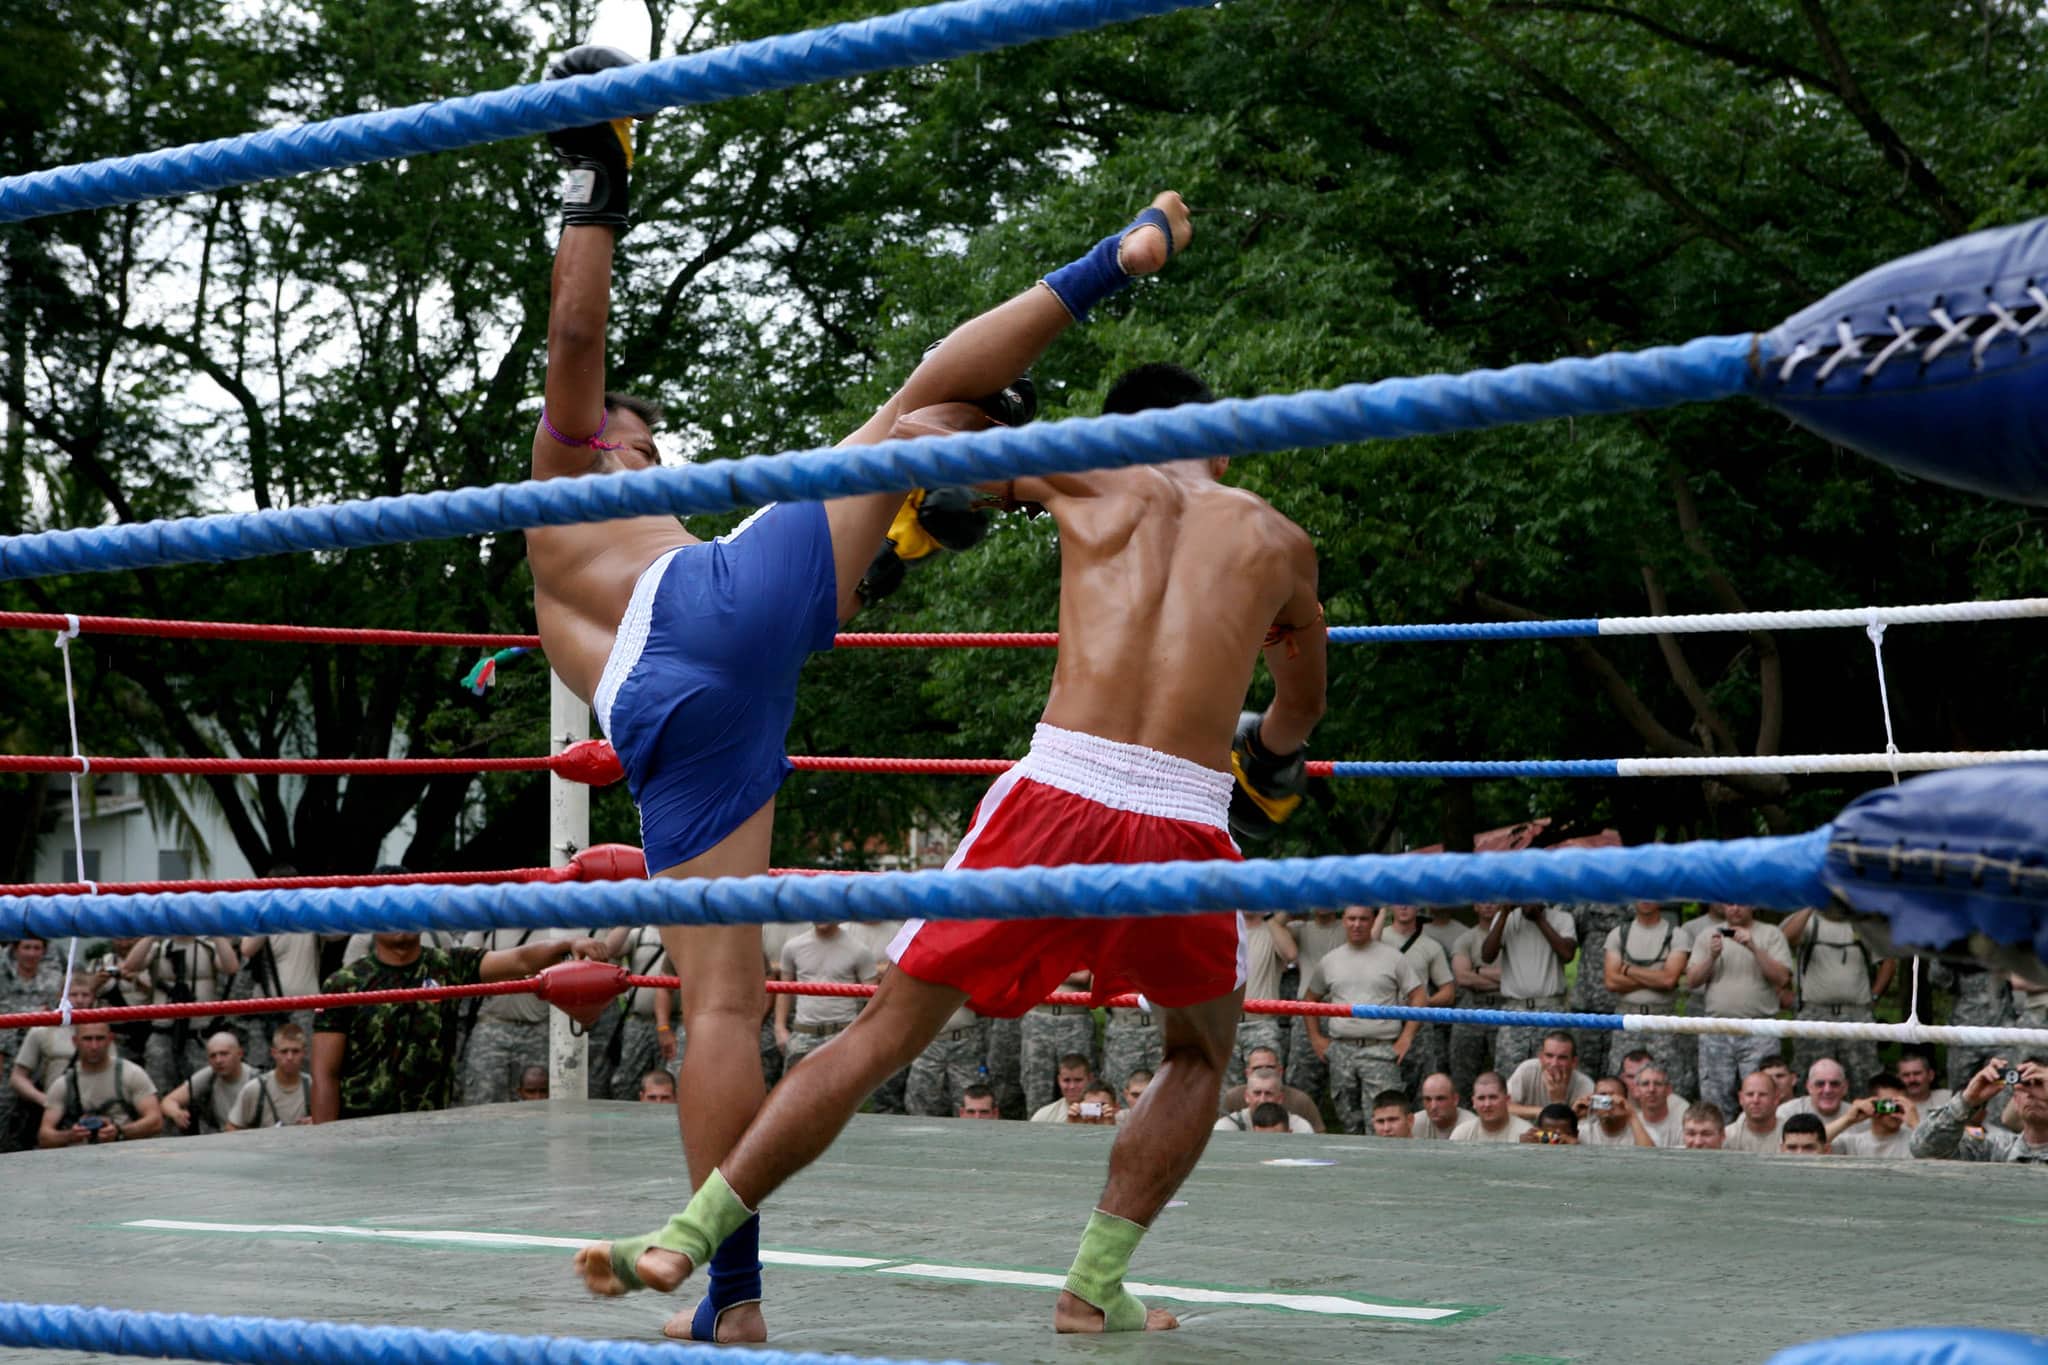 attempts a high roundhouse kick, which was blocked by (Name) and answered with an awe-inspiring and painful leg sweep at a Muay Thai demonstration